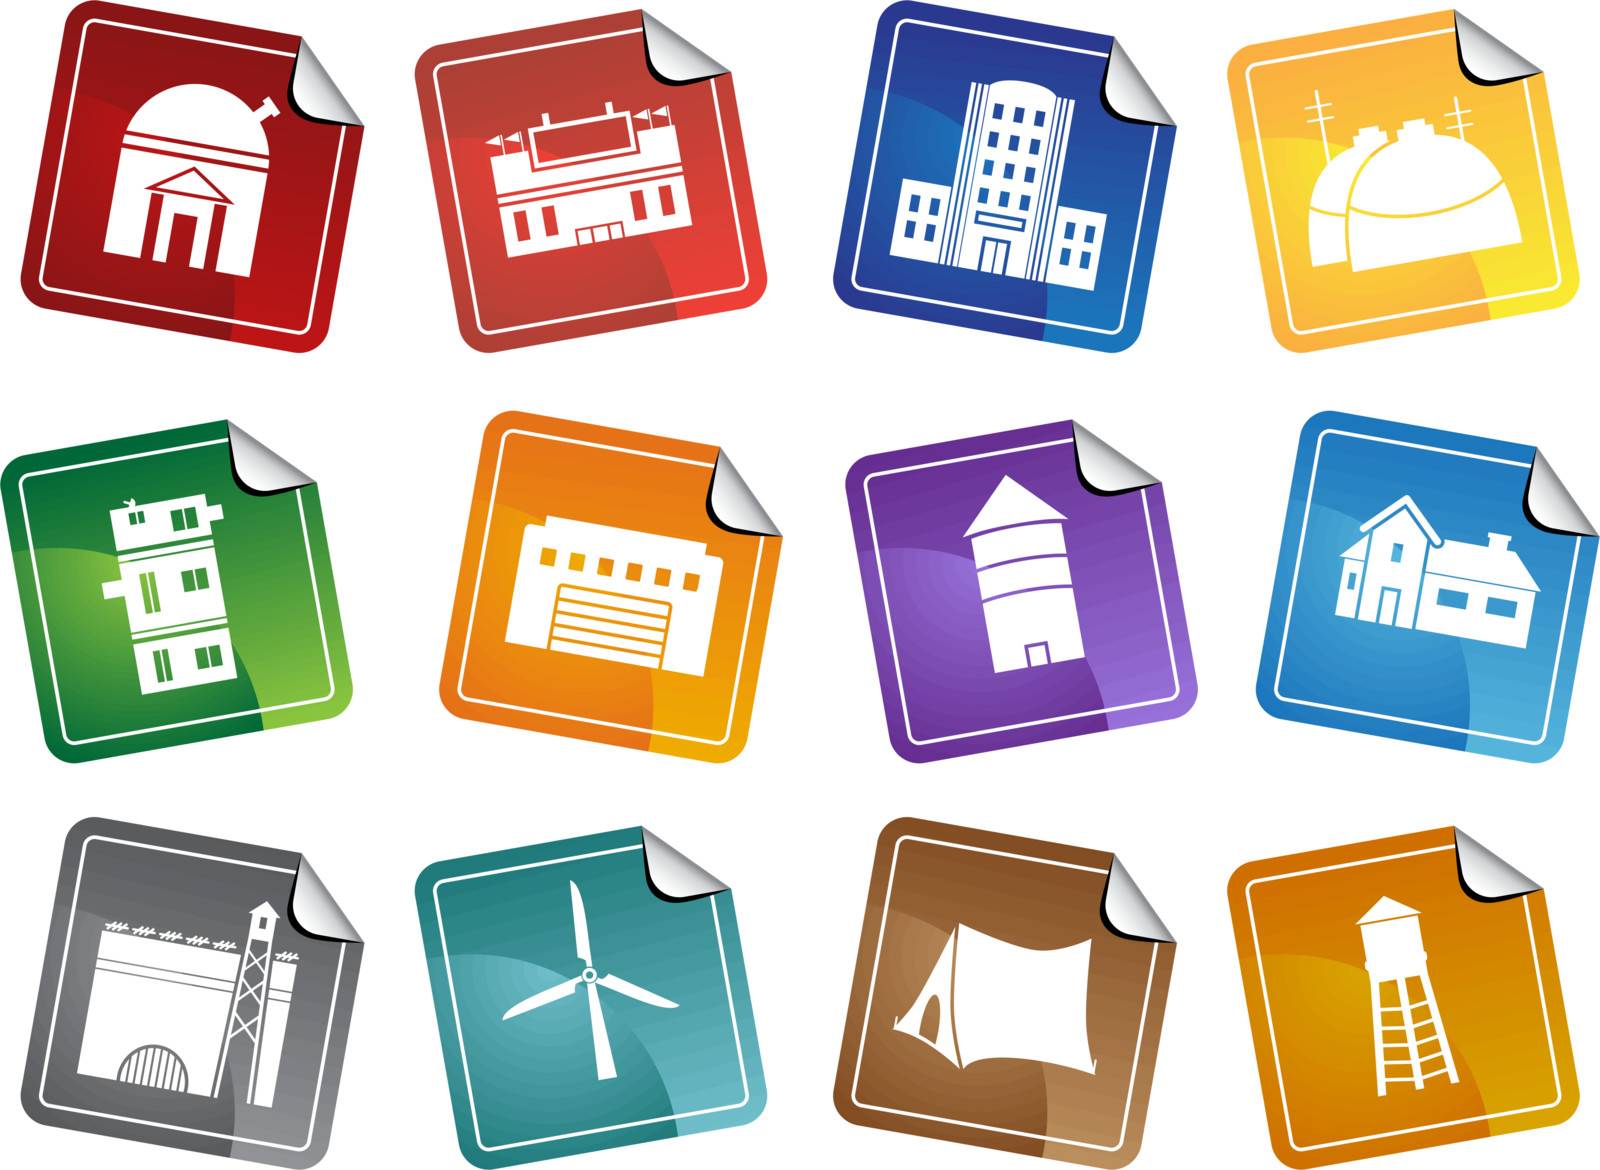 Building Structure Set - Sticker by cteconsulting